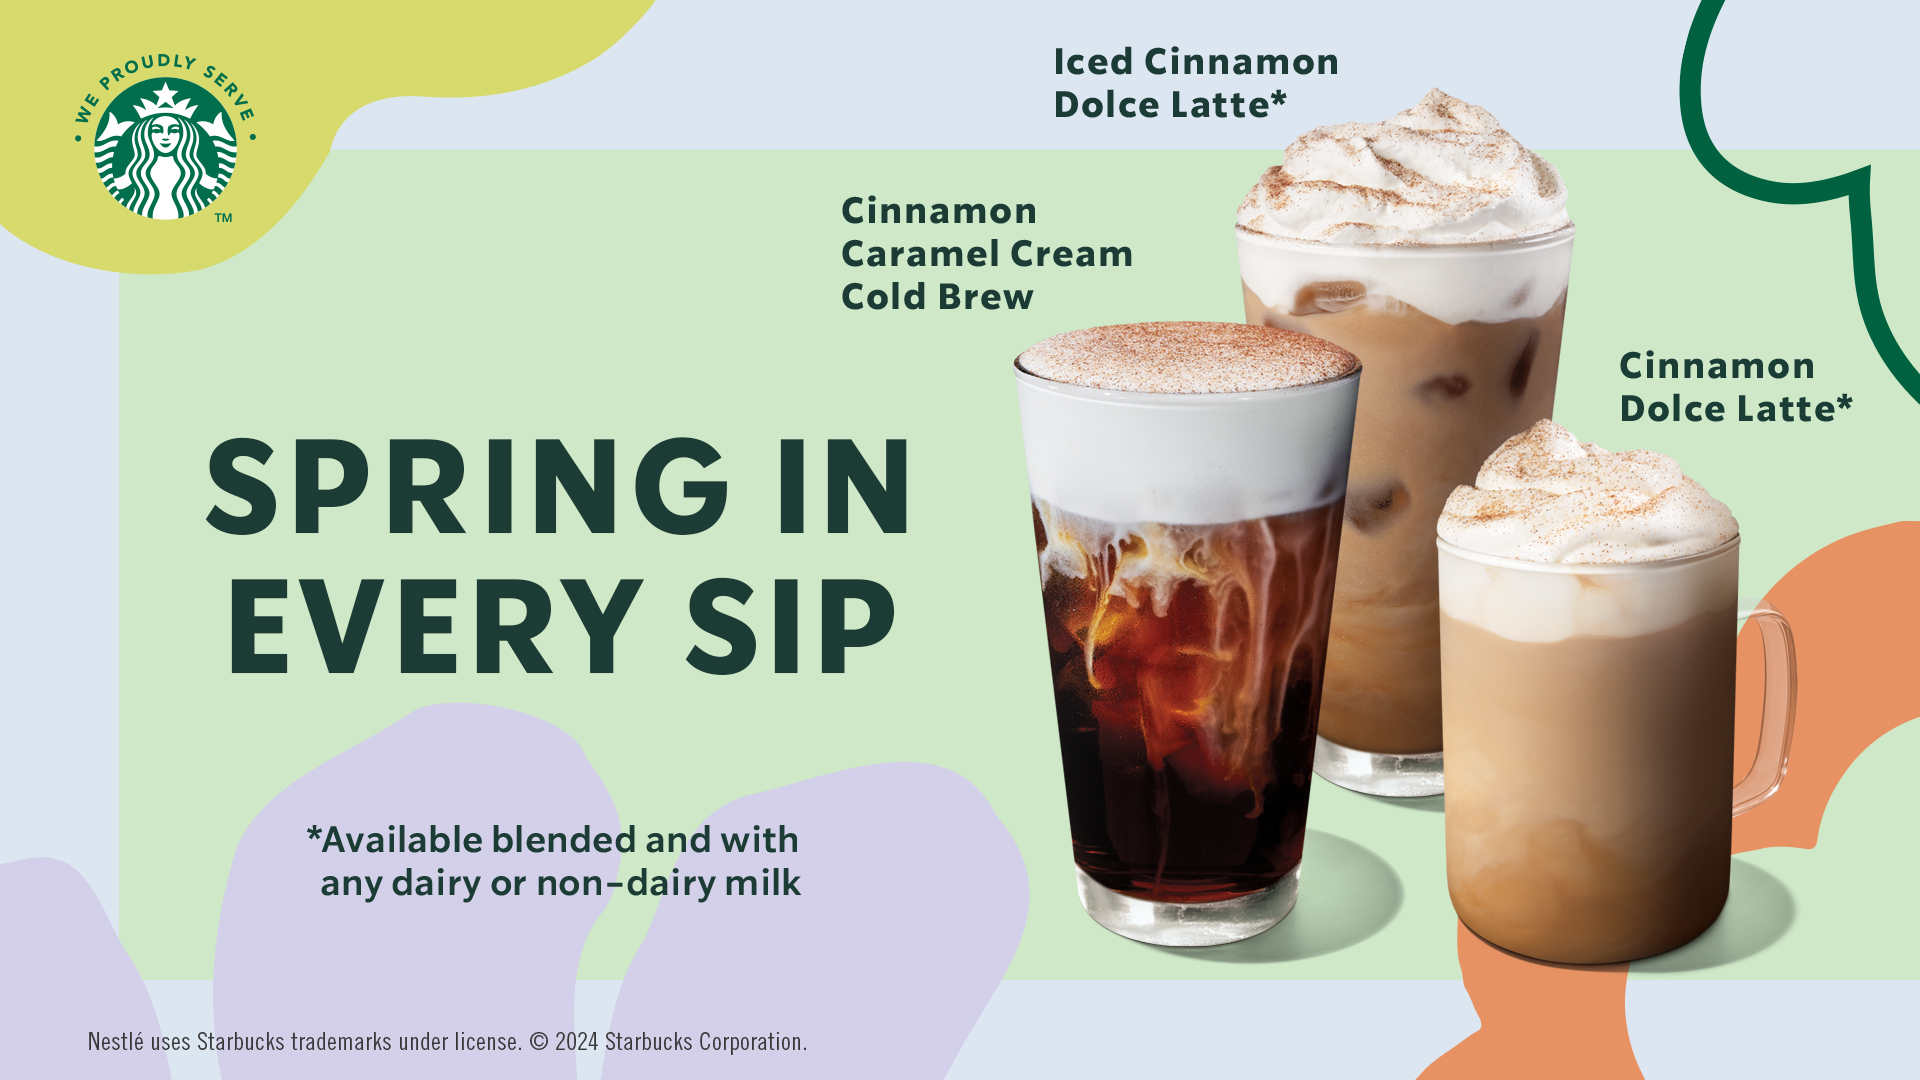 Discover new flavors for the spring